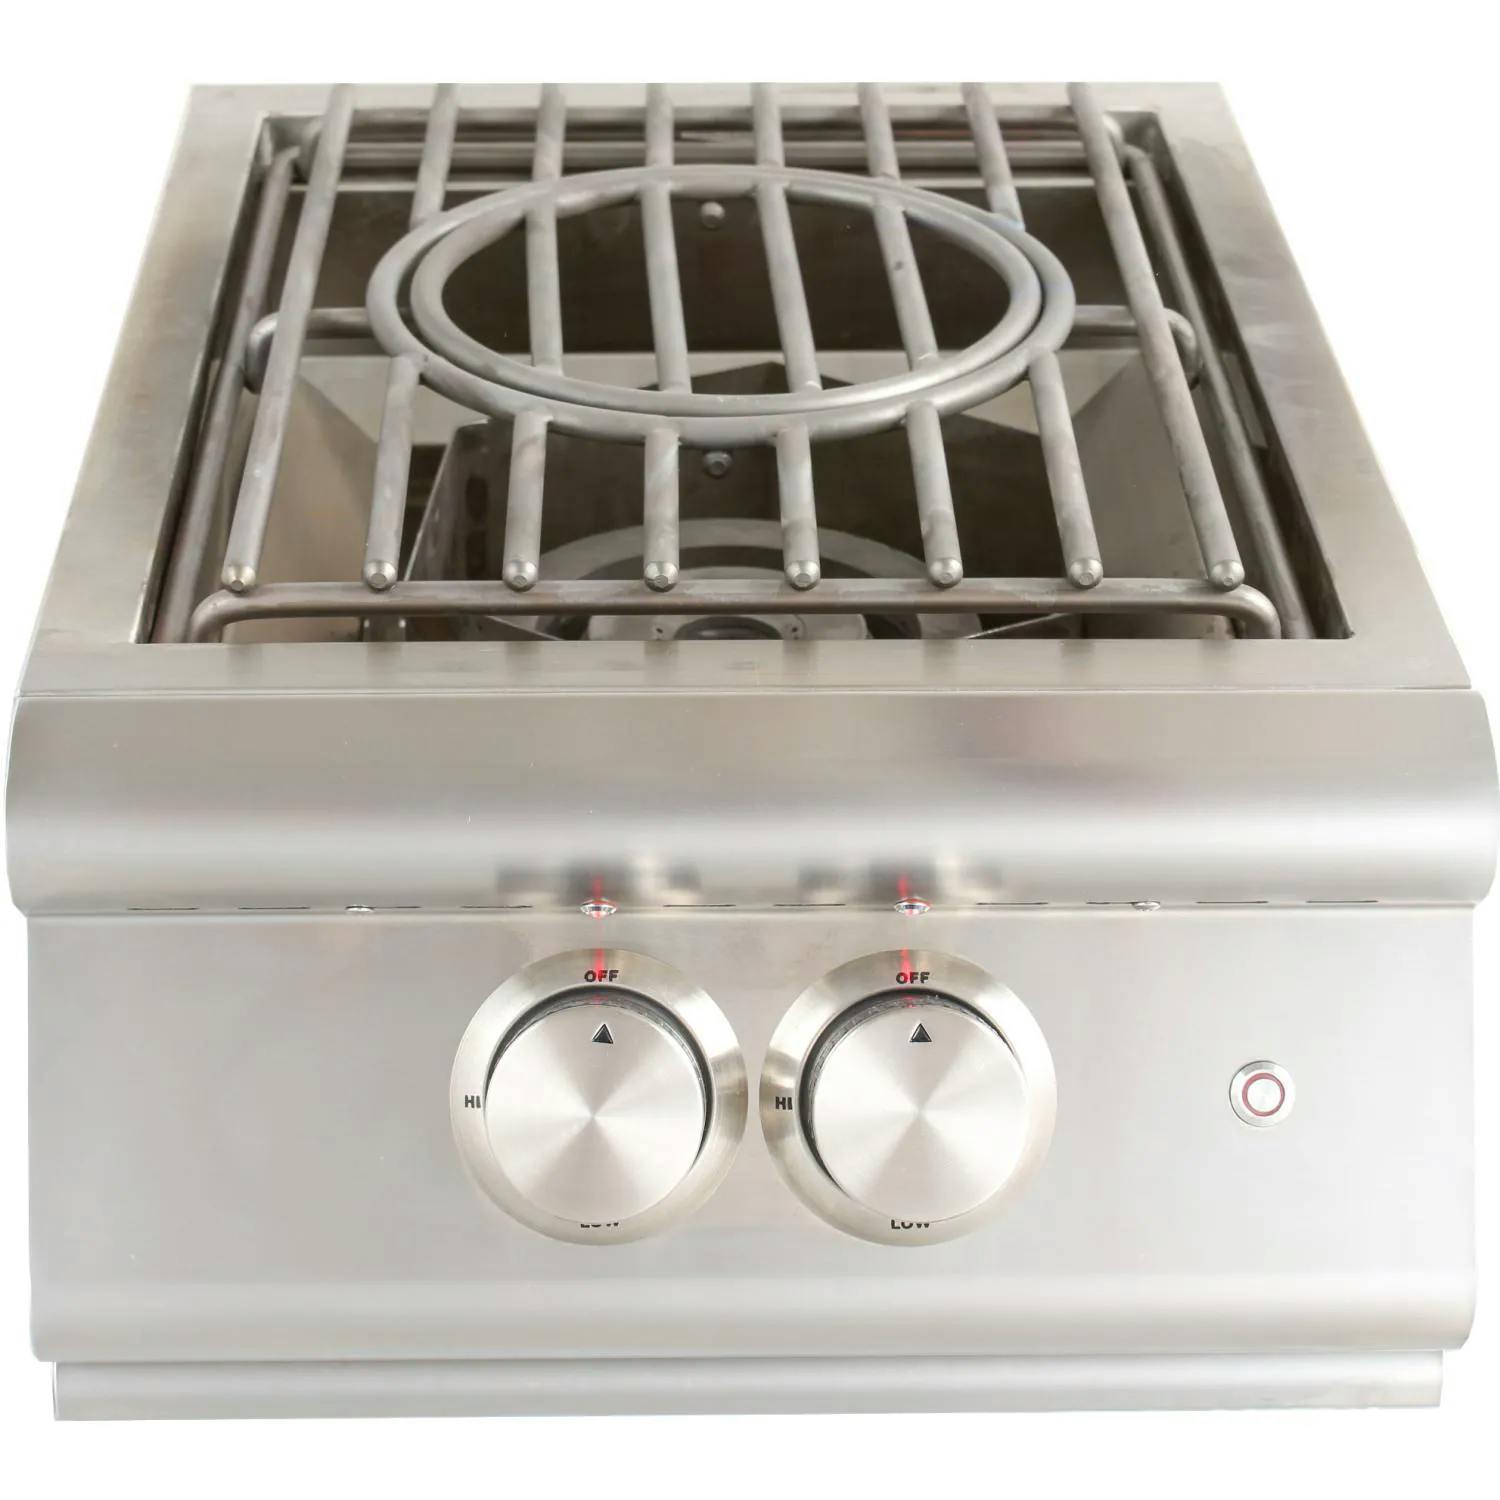 Blaze Premium LTE Built-In High Performance Power Burner with Wok Ring and Stainless Steel Lid · Natural Gas